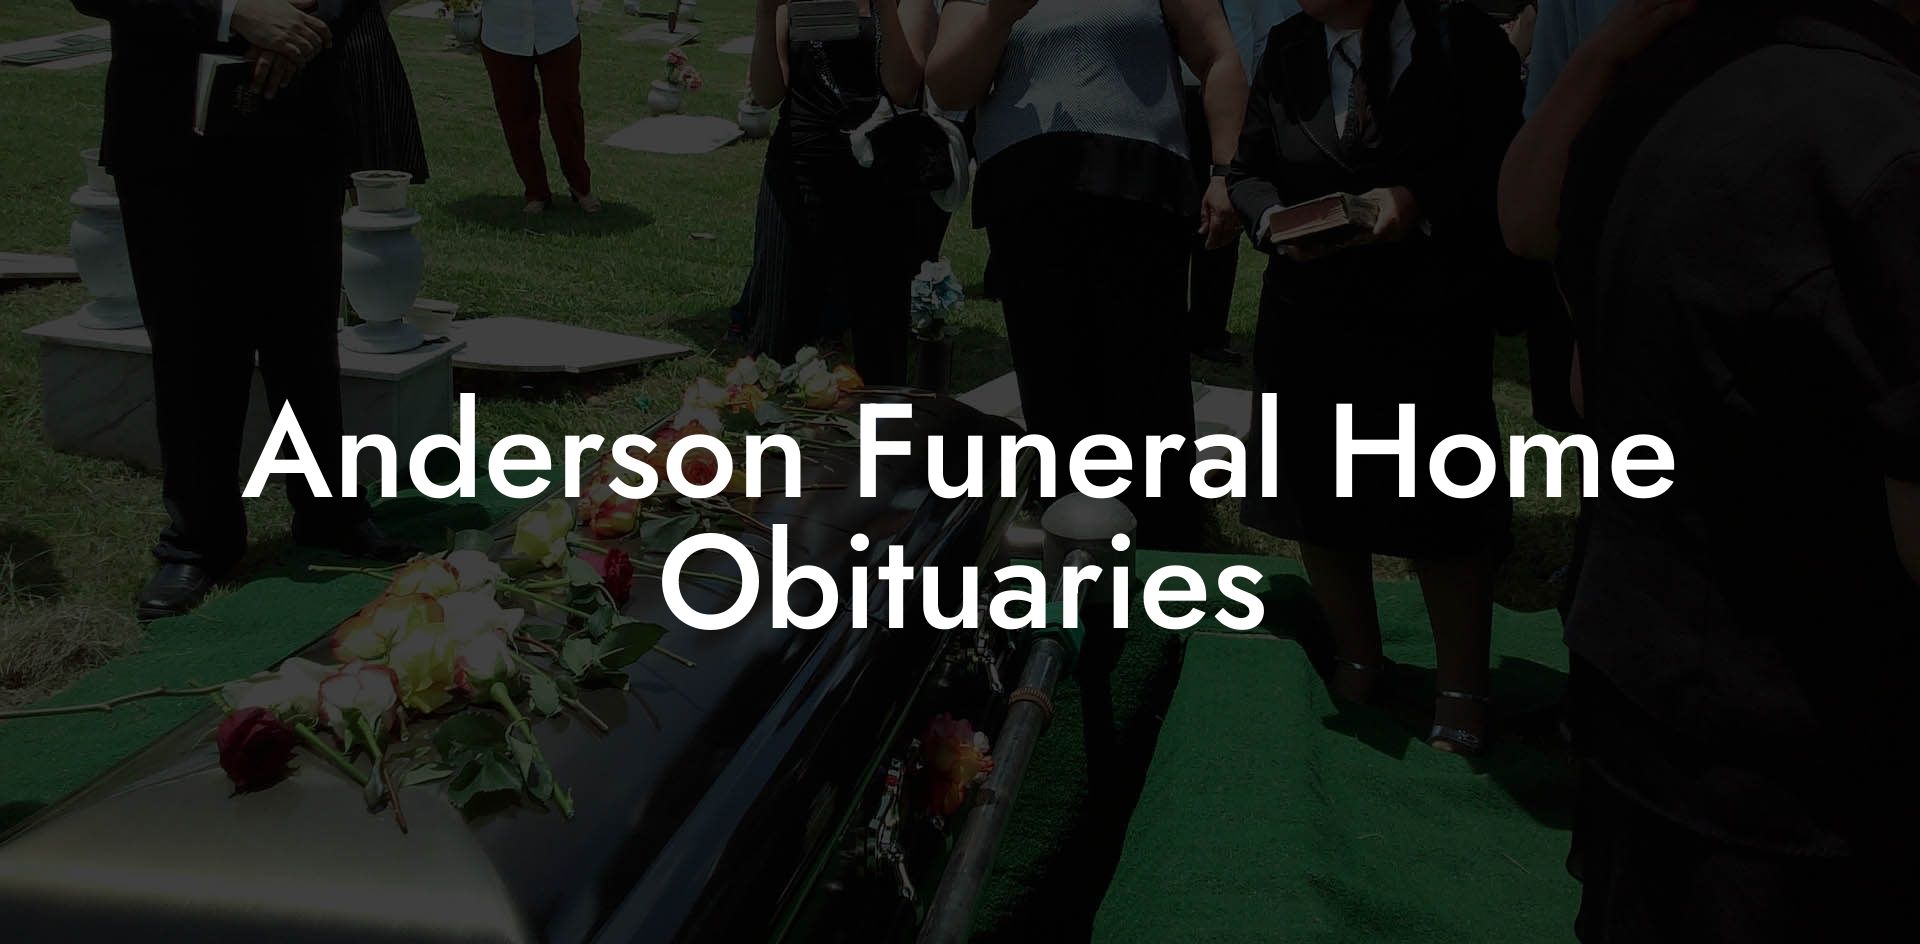 Anderson Funeral Home Obituaries